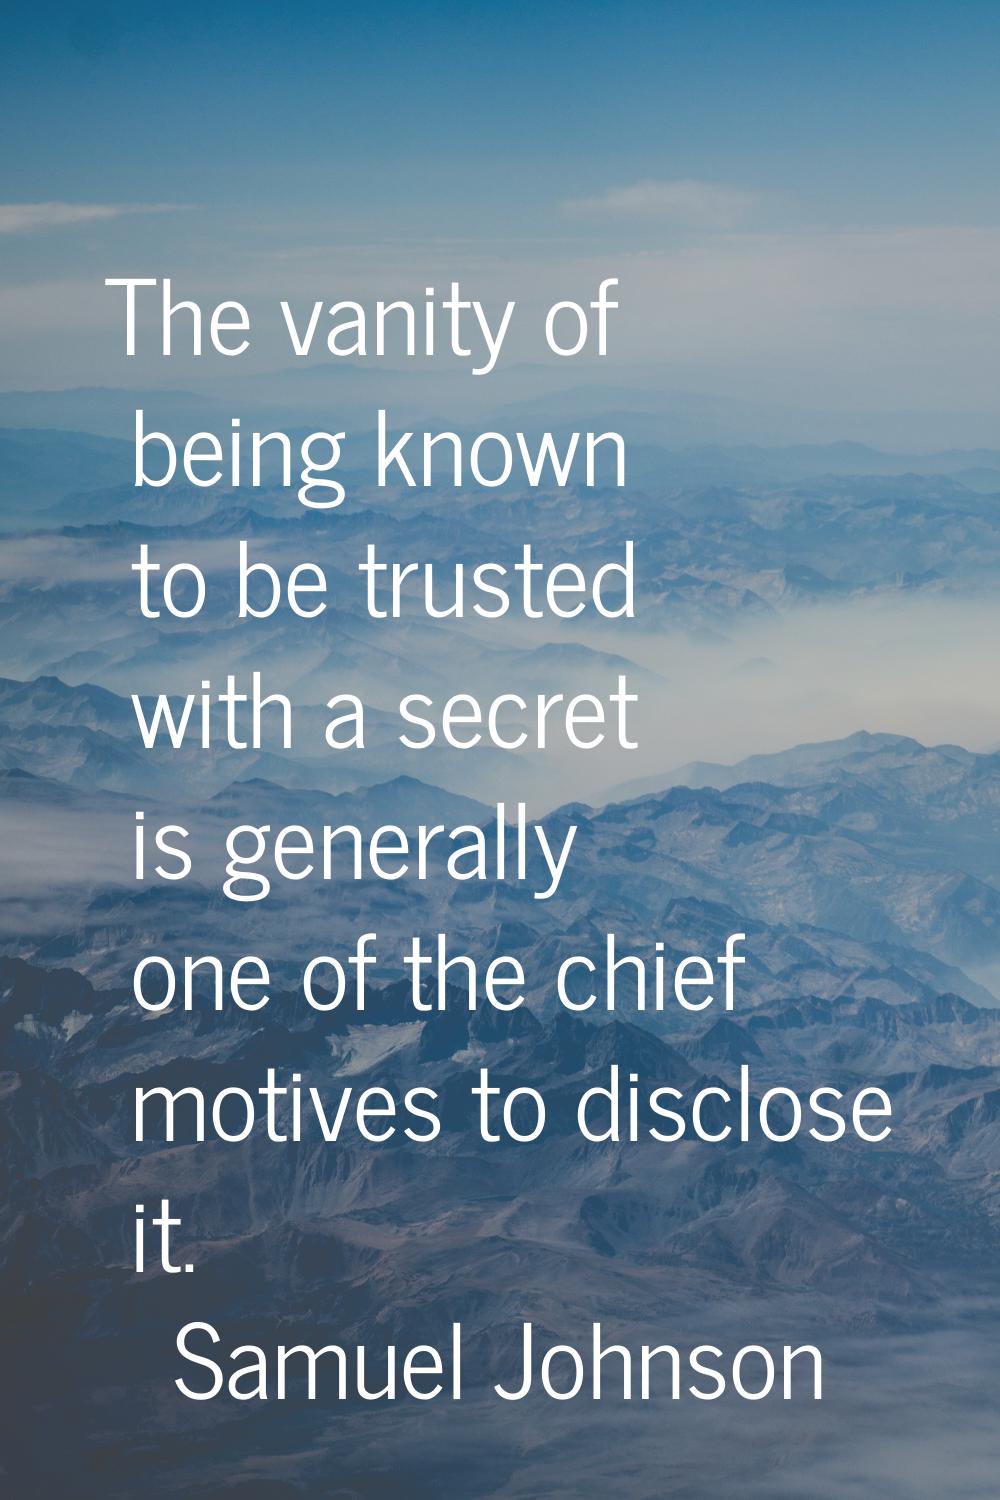 The vanity of being known to be trusted with a secret is generally one of the chief motives to disc